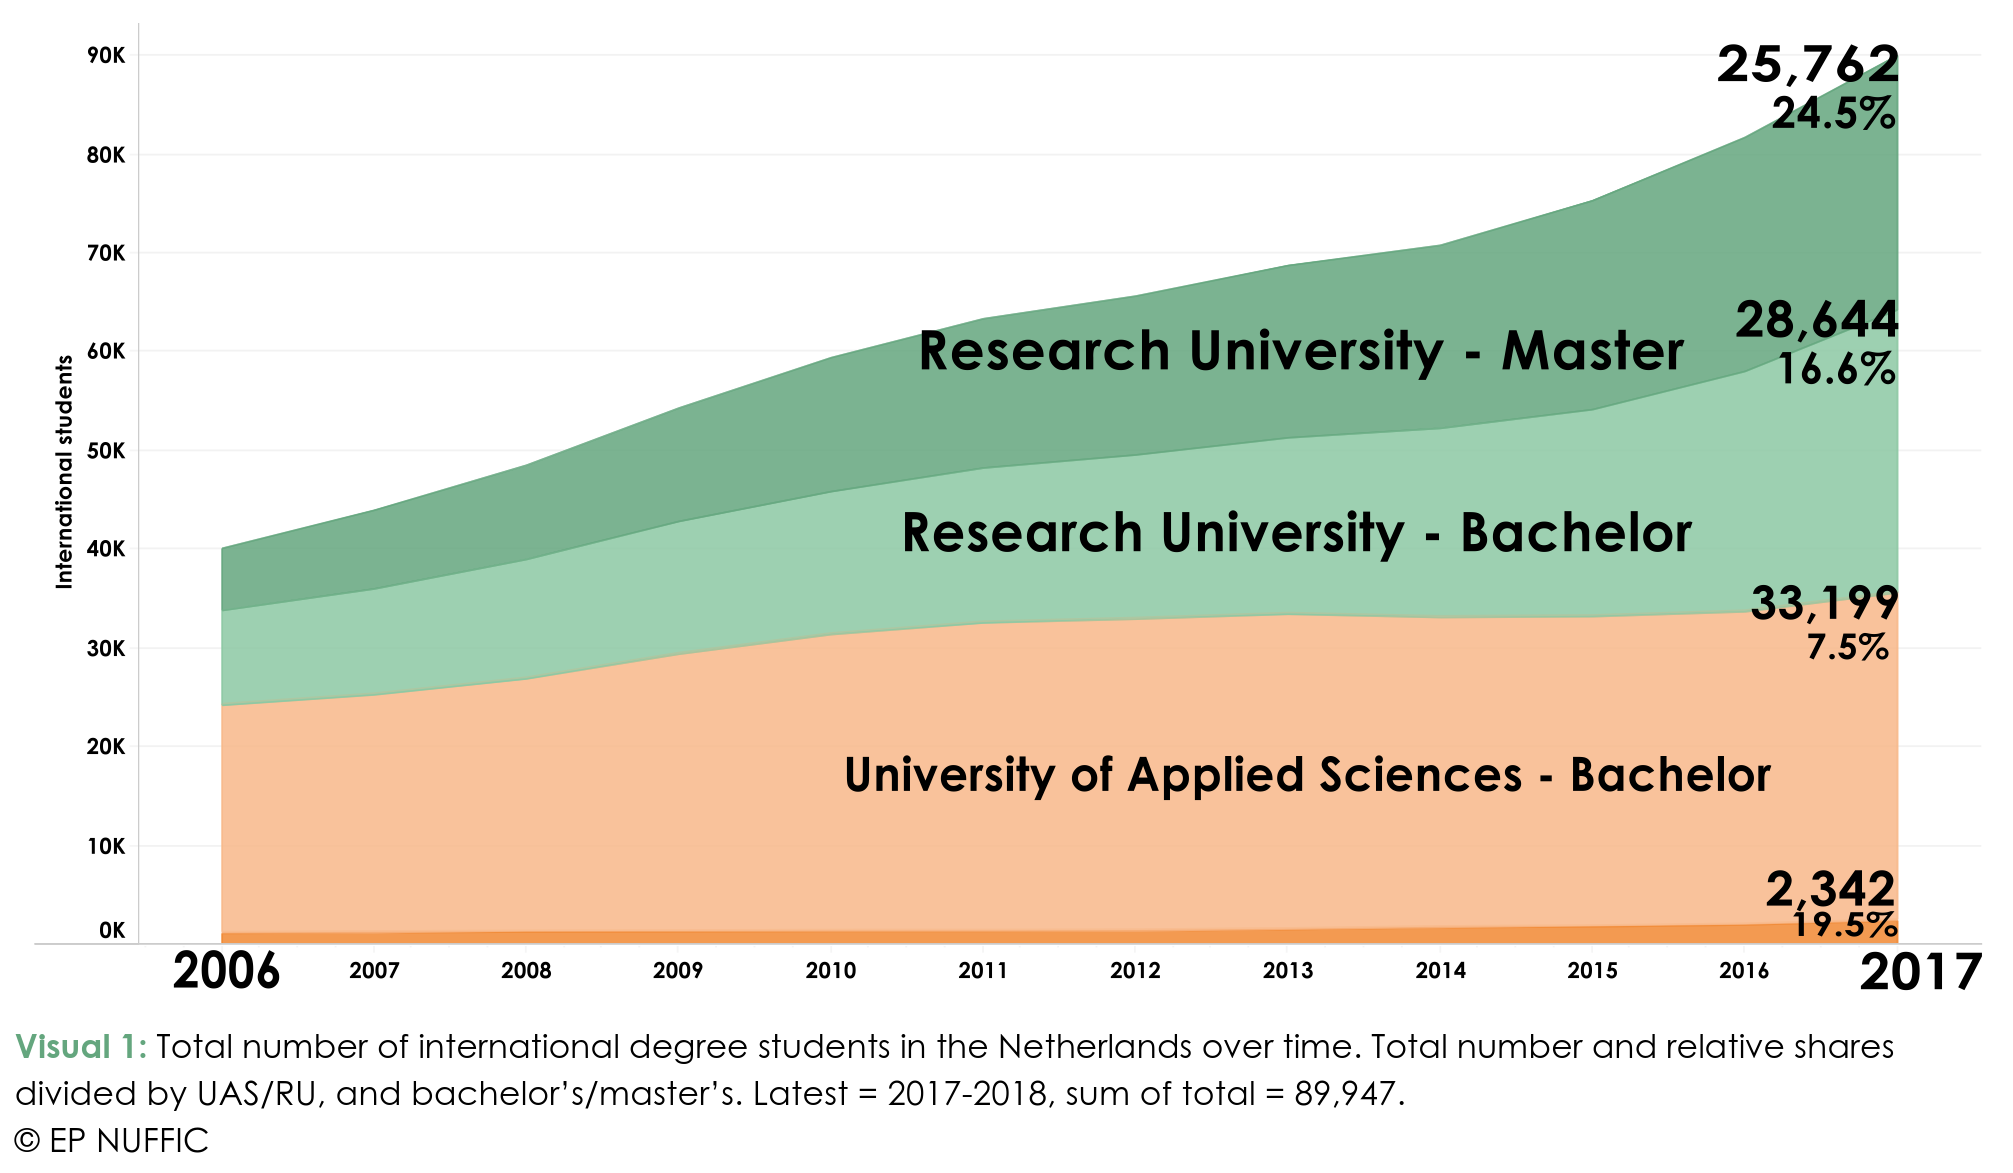 incoming-student-mobility-in-dutch-higher-education-2017-2018.png